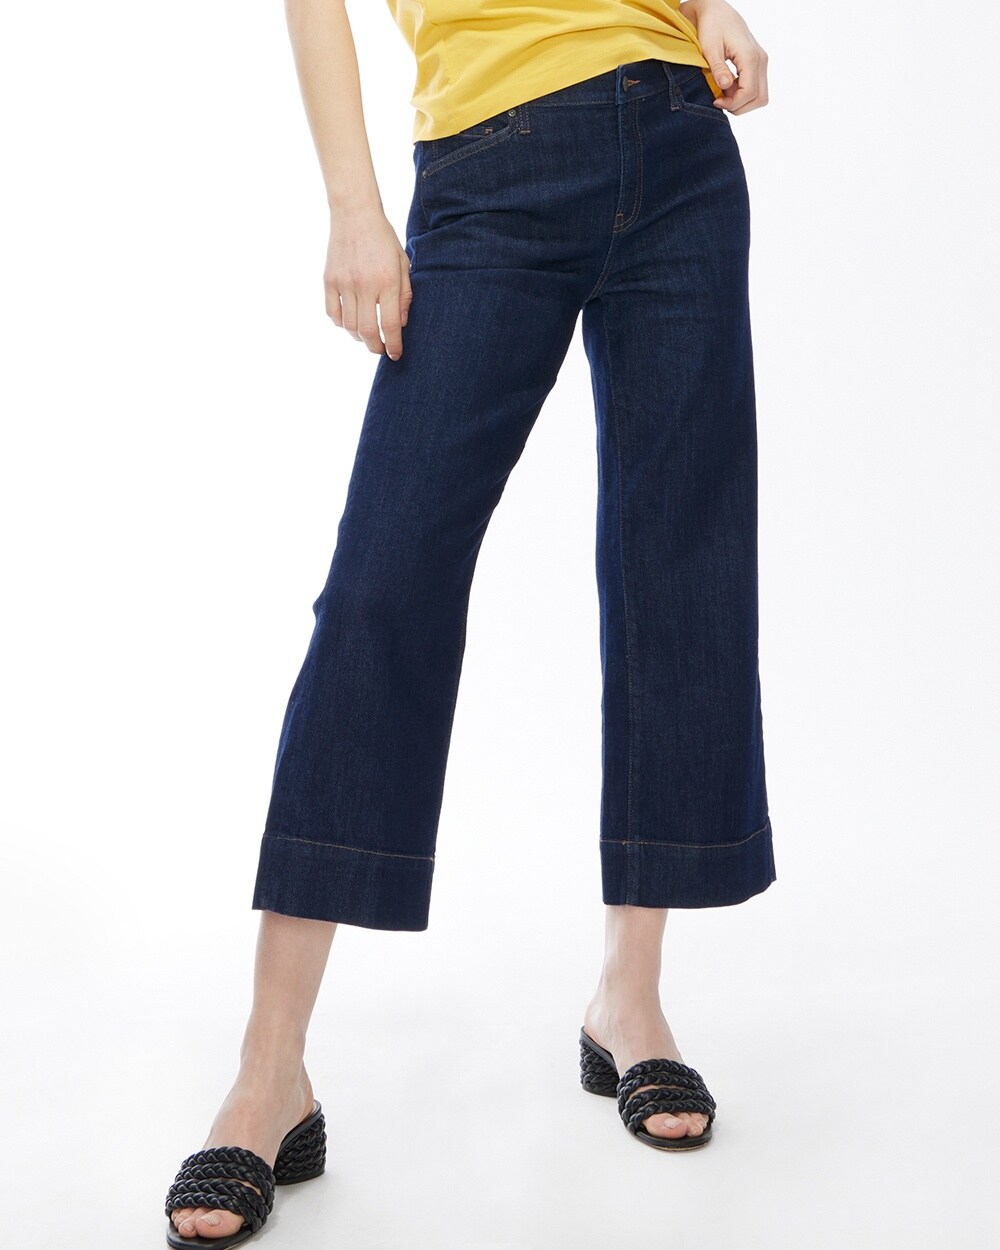 Denim Trouser Crops video preview image, click to start video